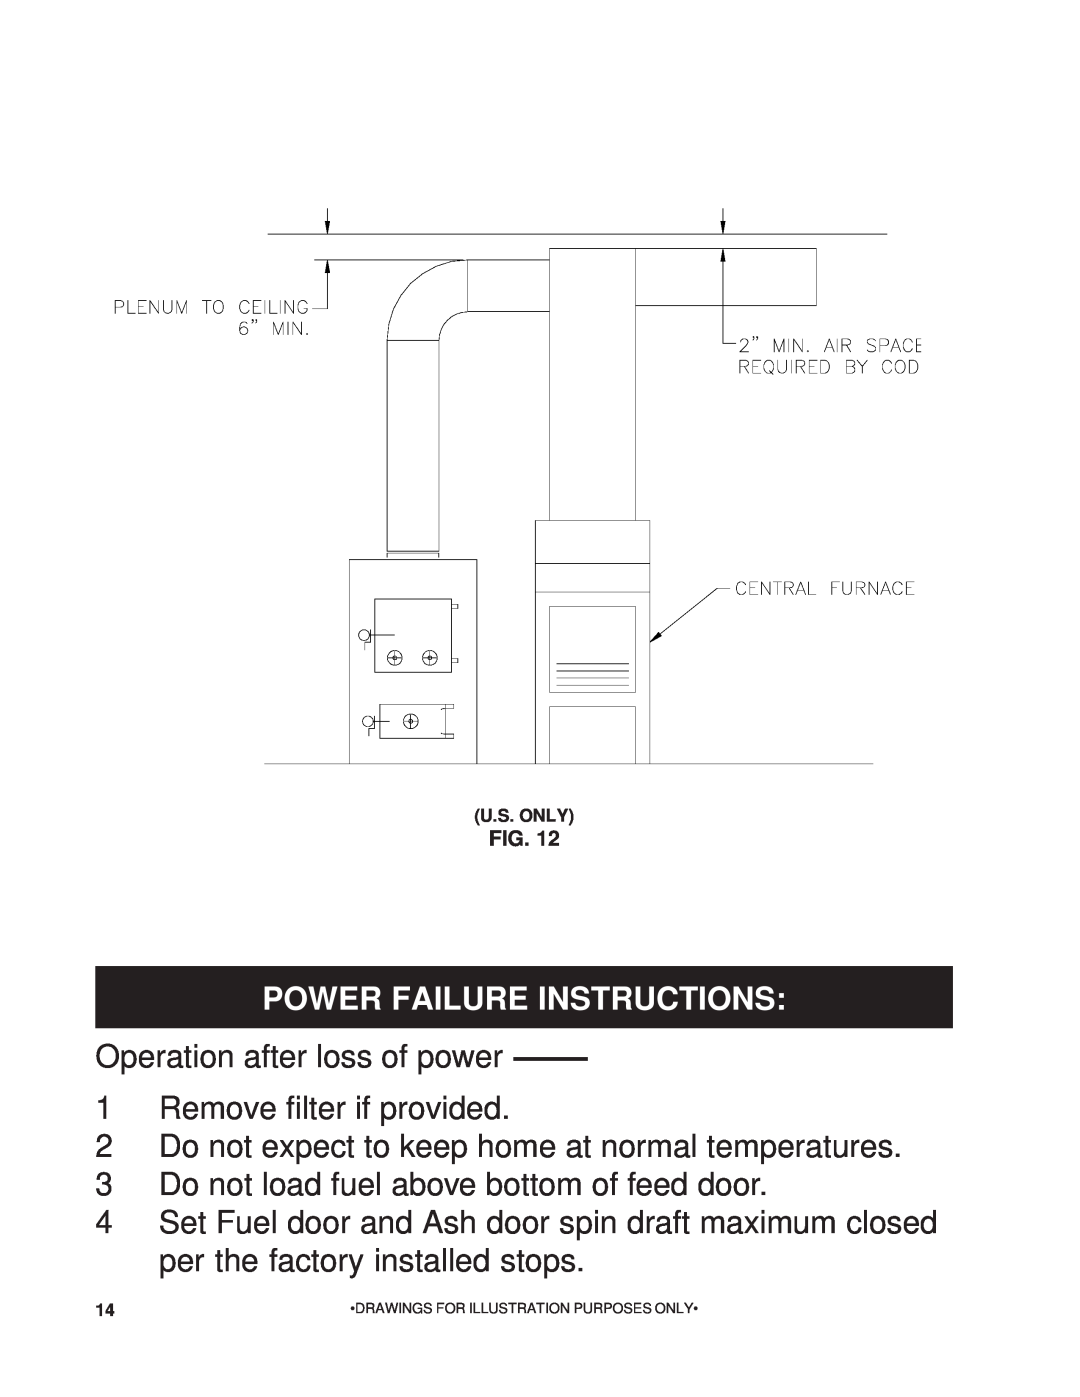 United States Stove 1200G Power Failure Instructions, Operation after loss of power, 1Remove filter if provided, U.S. Only 